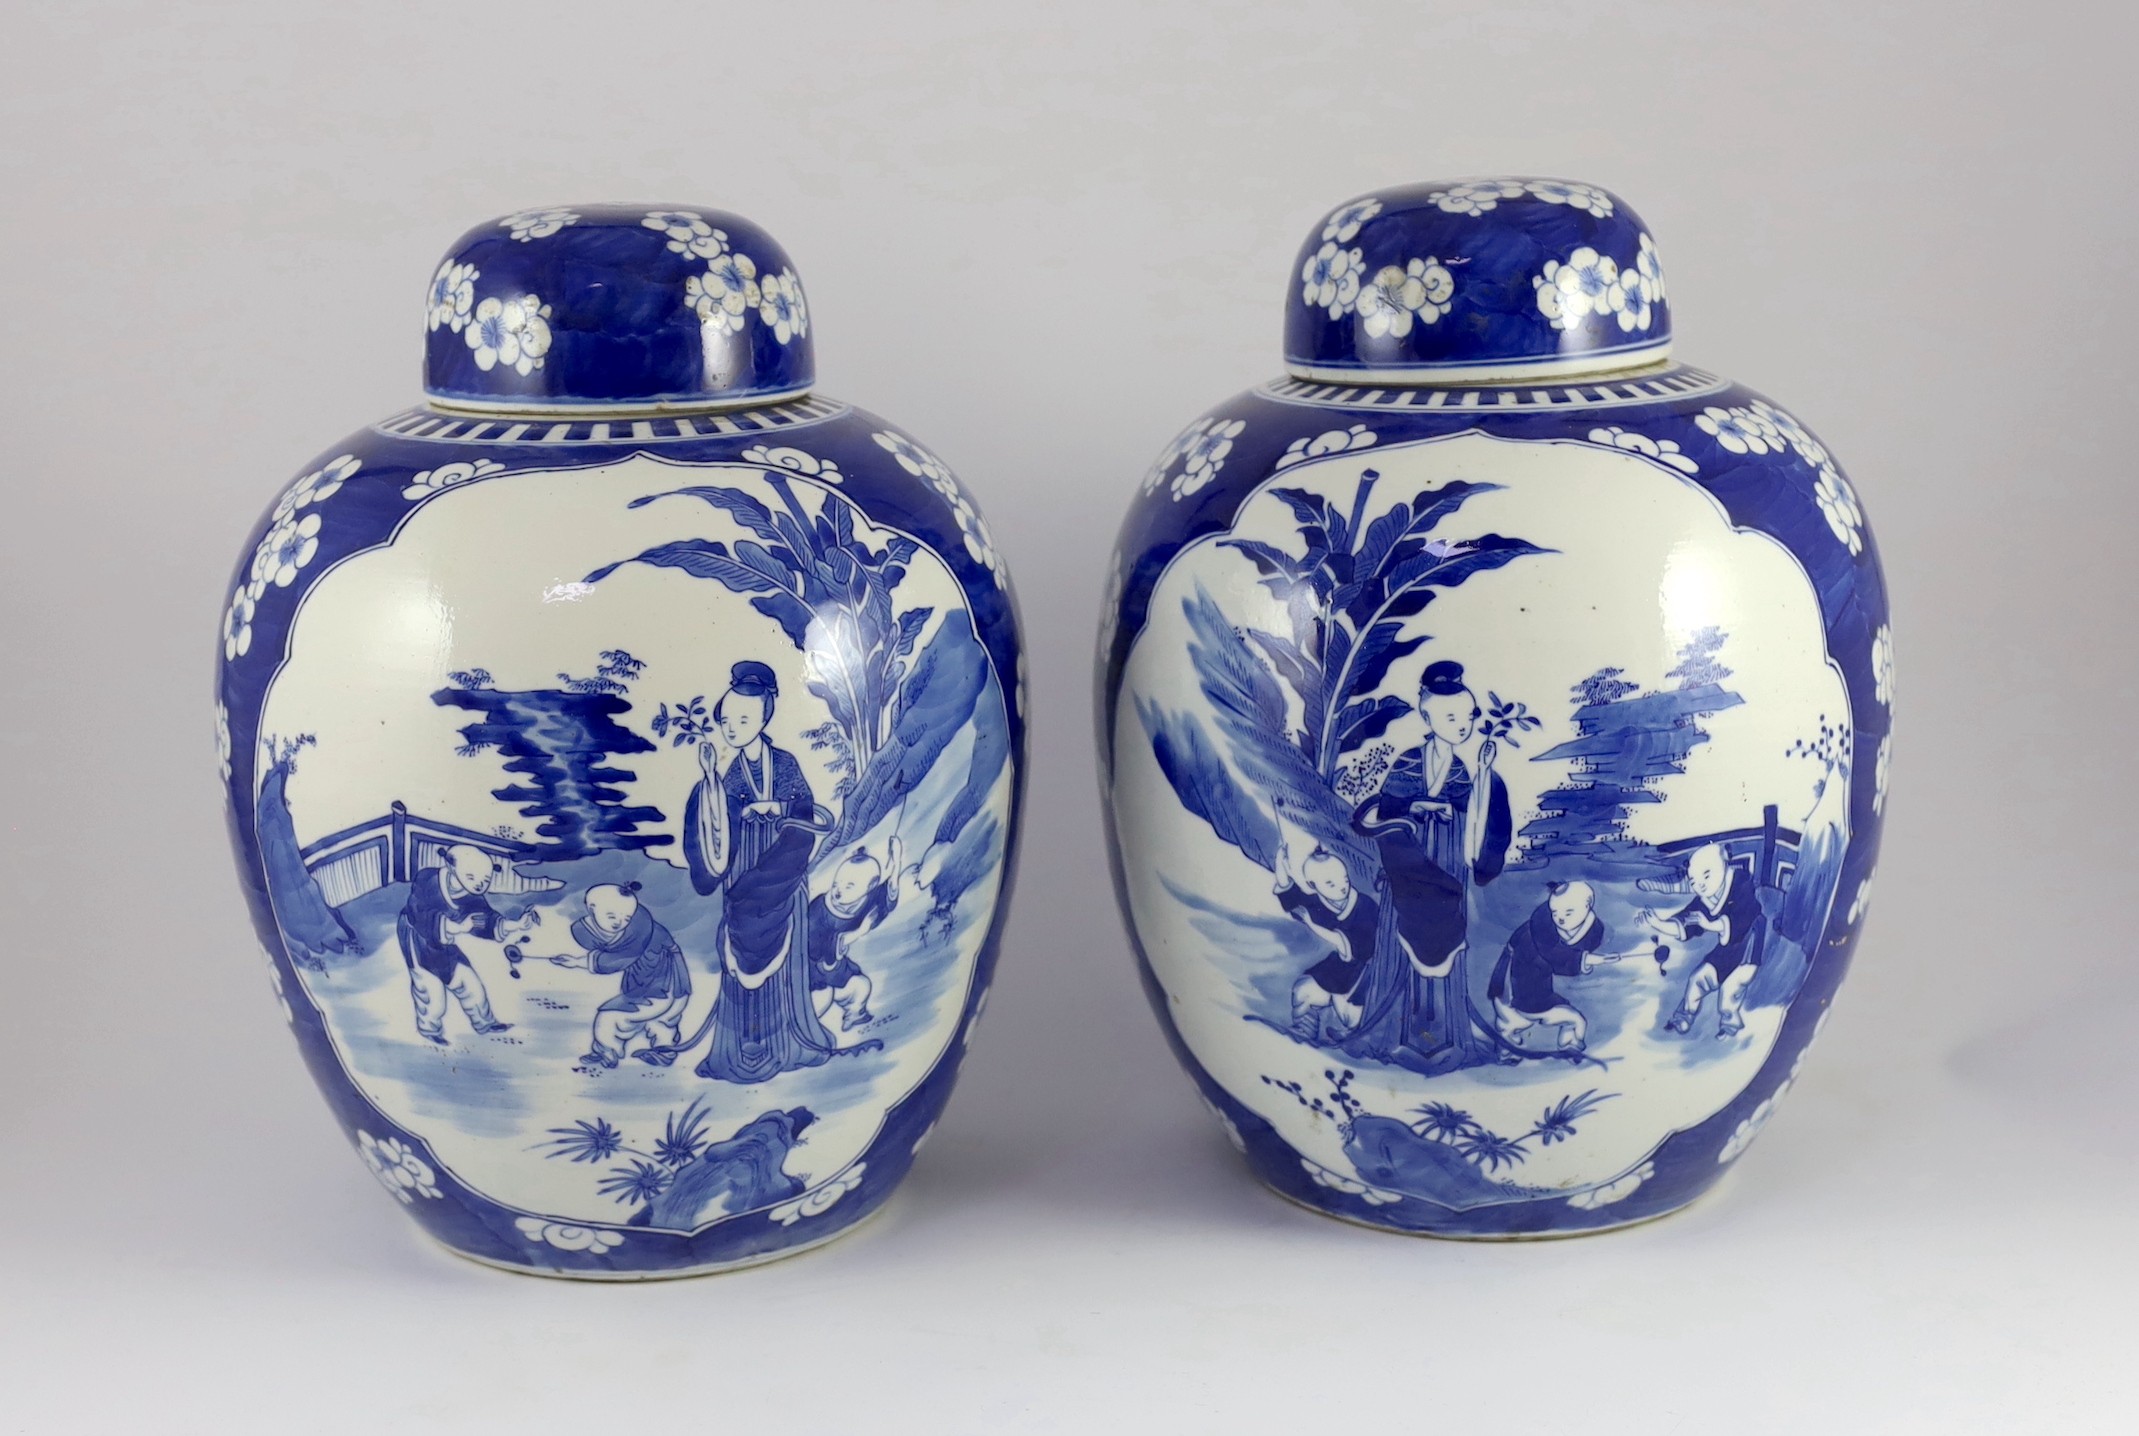 A pair of large Chinese blue and white jars and covers, 19th century, 33cm high